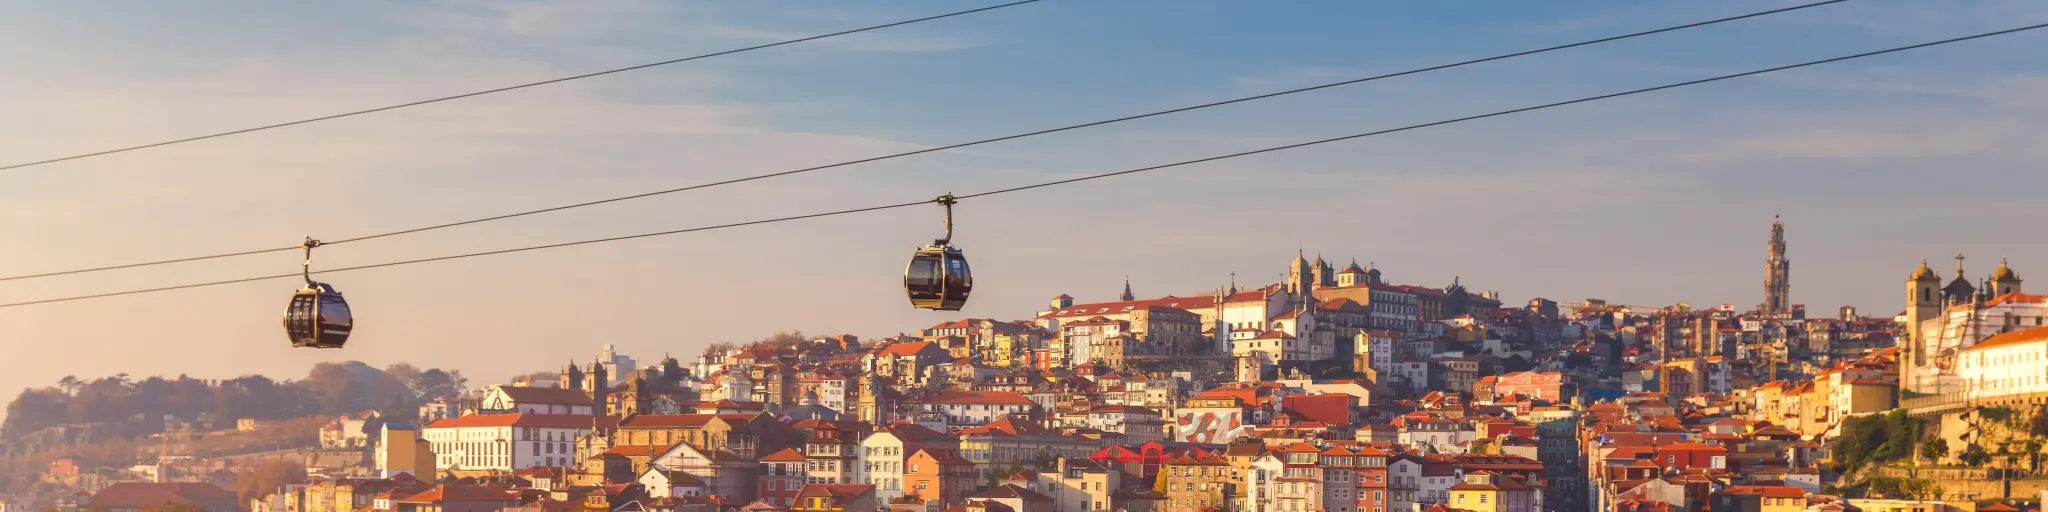 Colourful houses with red roof tiles in Porto, Portugal, with a cable car going overhead